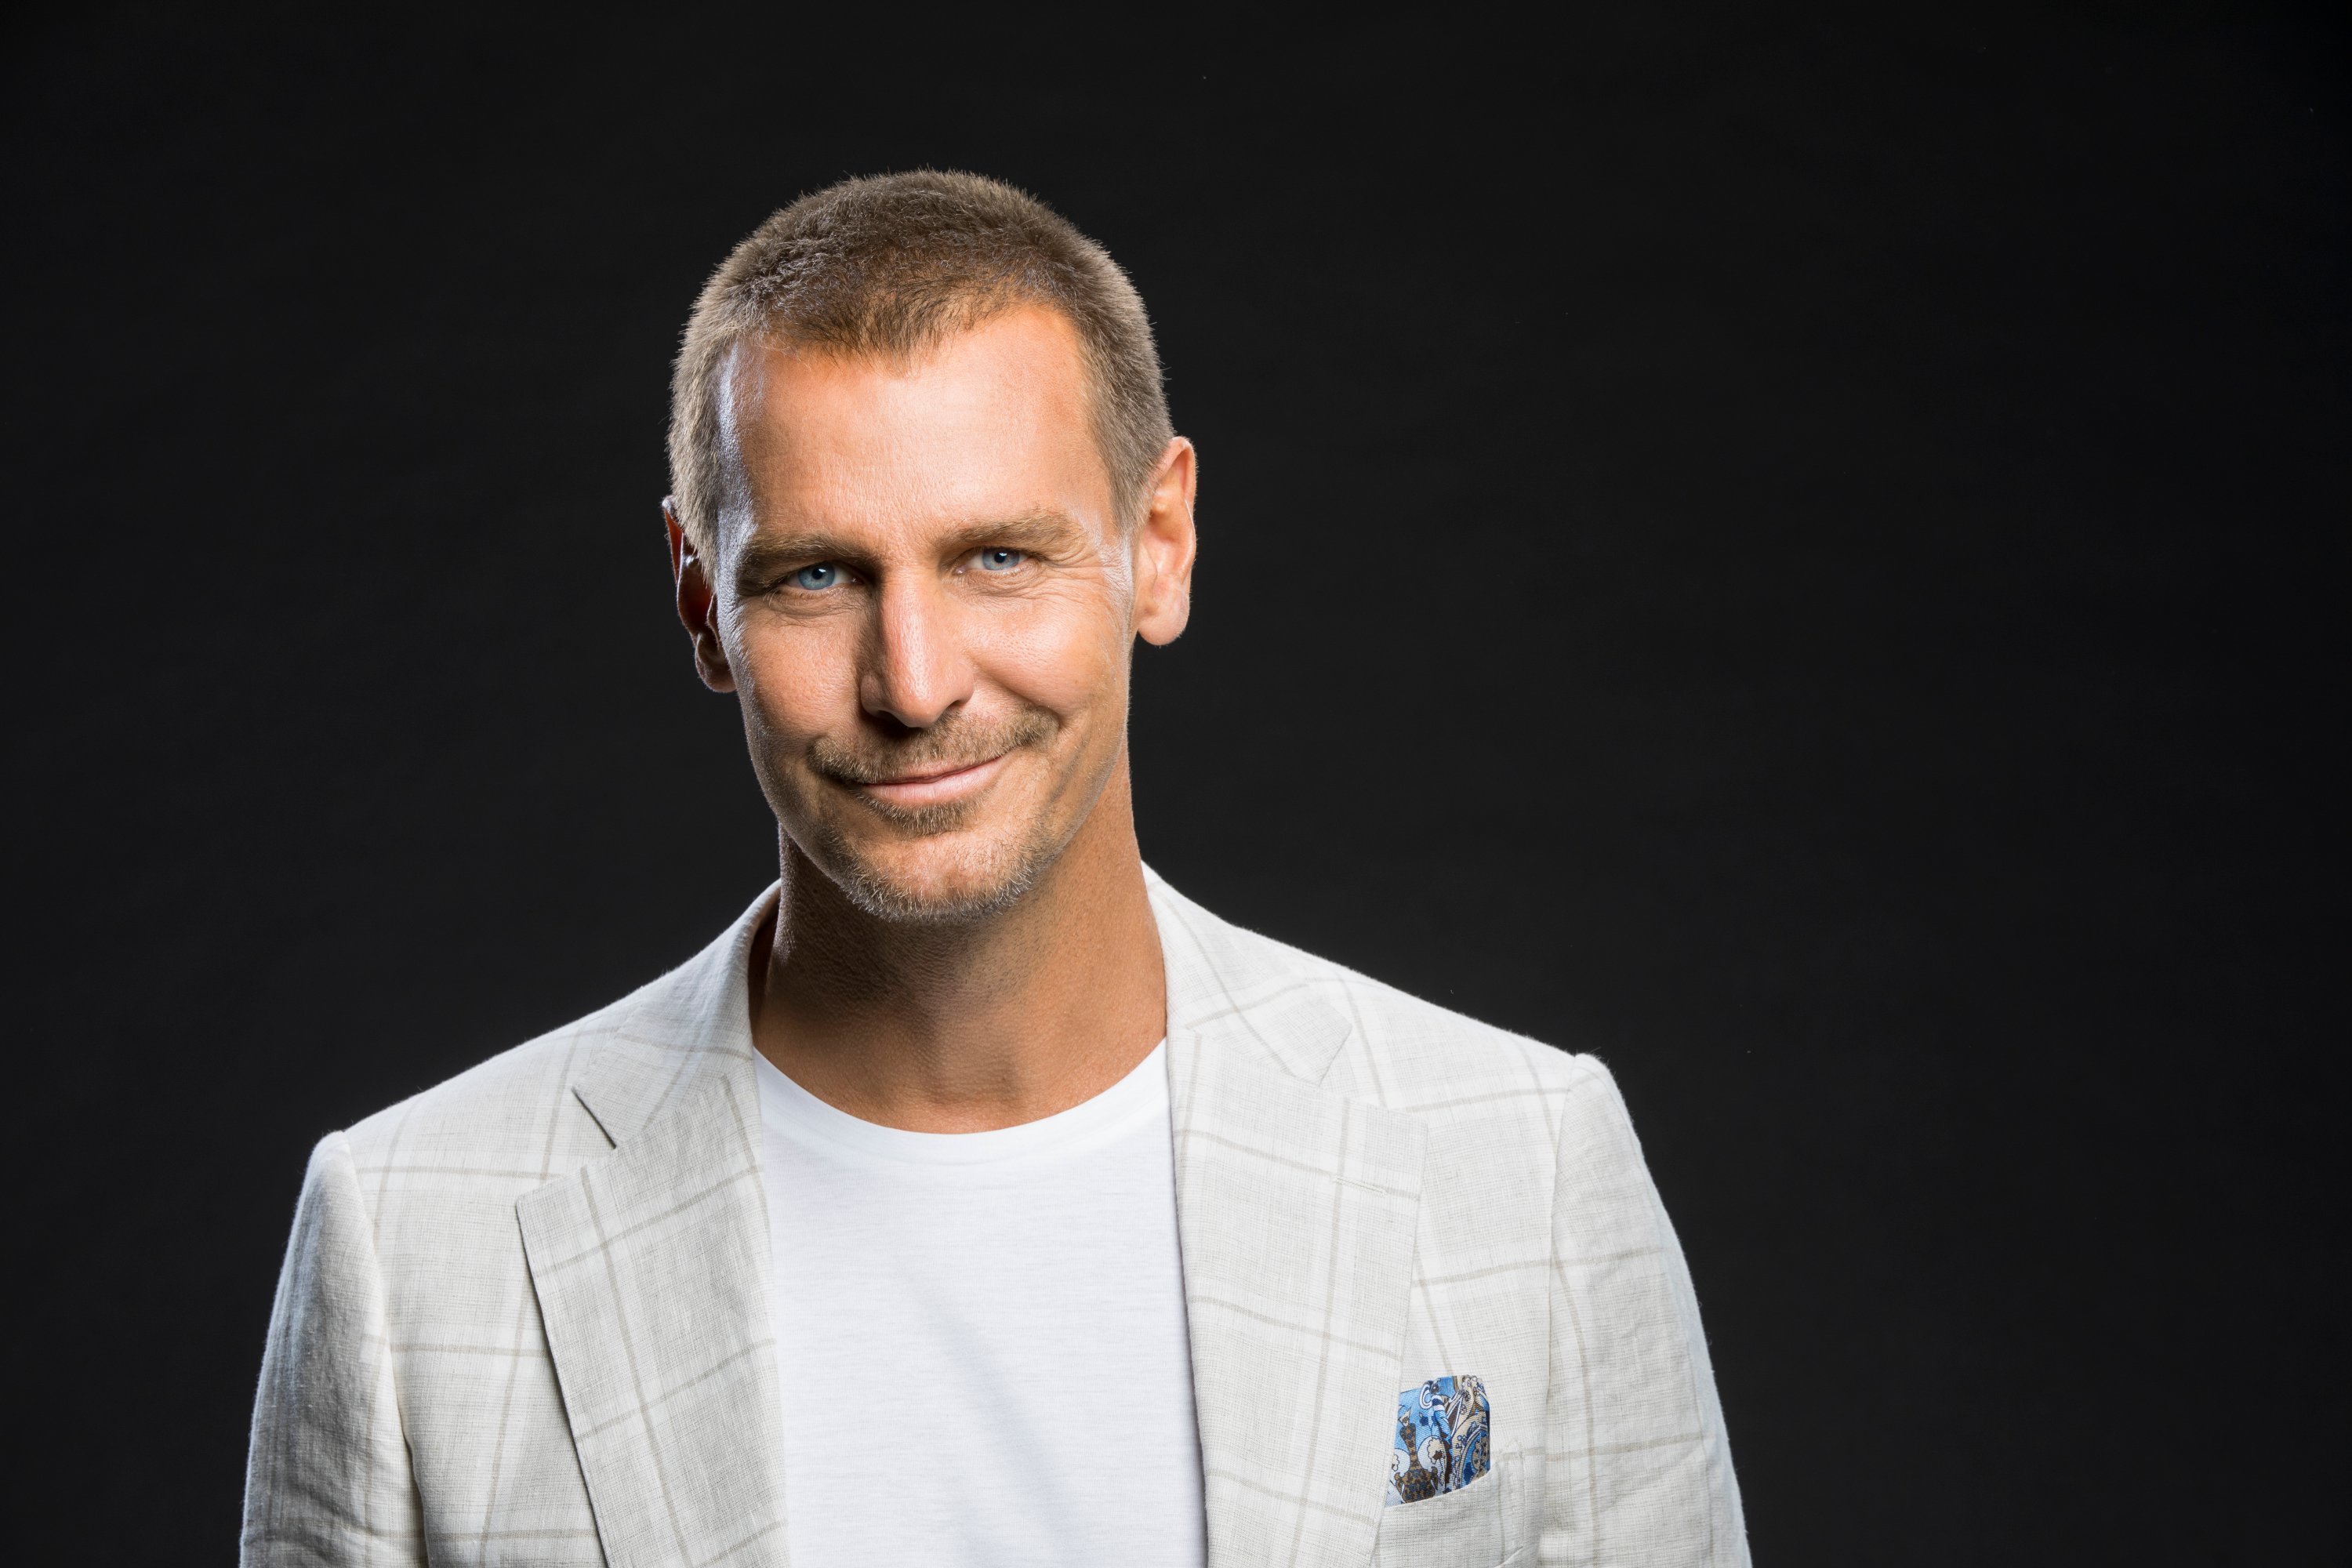 'The Bold and the Beautiful' actor Ingo Rademacher wearing a grey jacket and white shirt, and standing in front of a black backdrop.